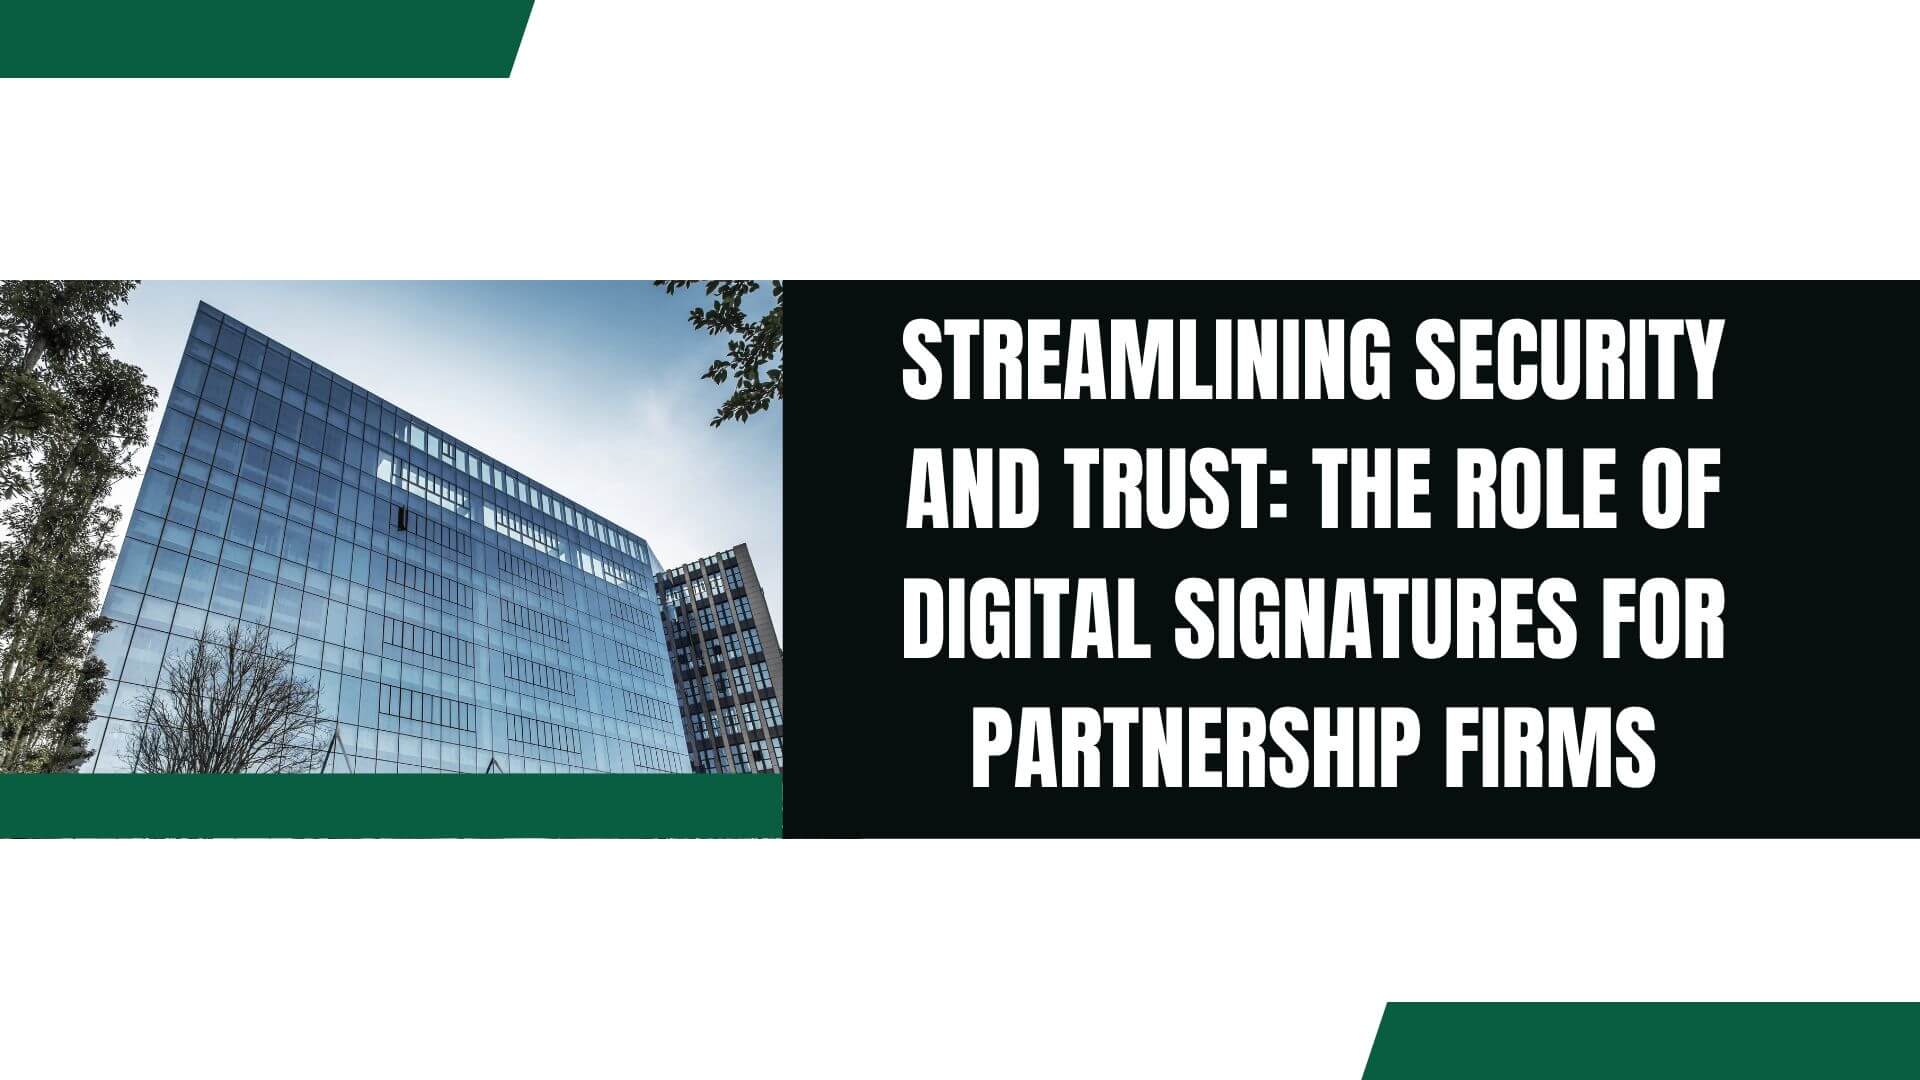 Streamlining Security and Trust: The Role of Digital Signatures for Partnership Firms